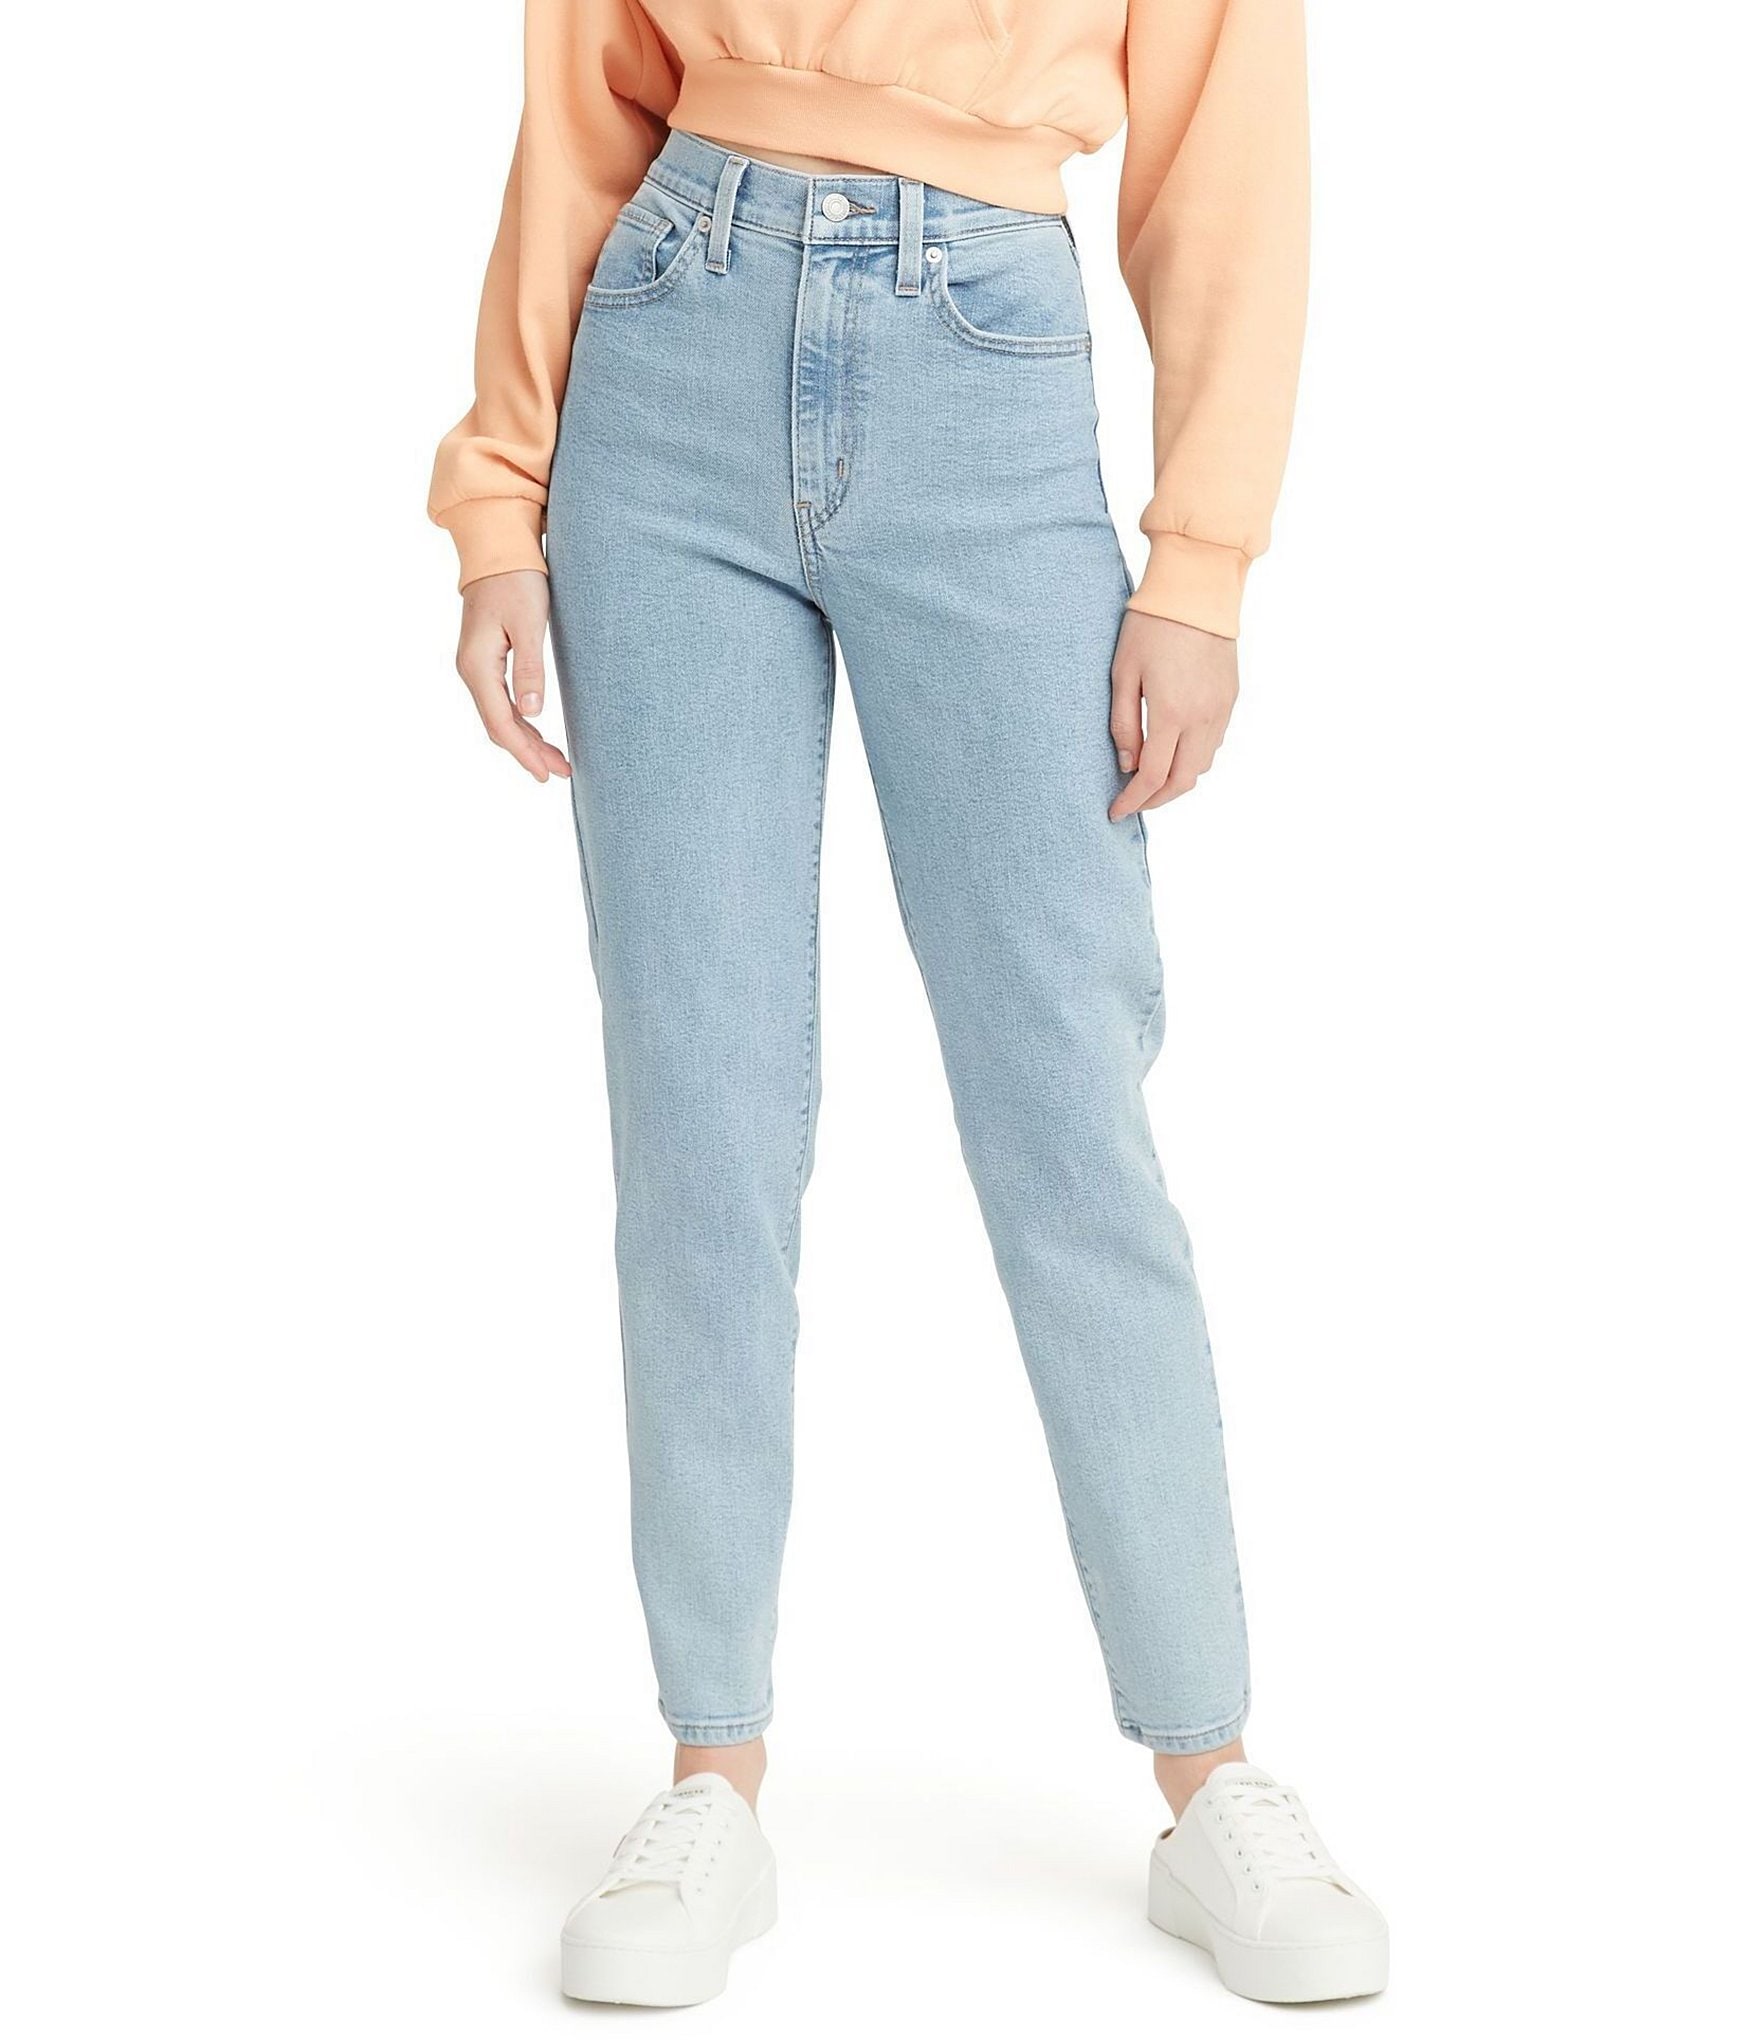 The FIX - Yo' mom jeans now R249.99 reppin' a high-rise 